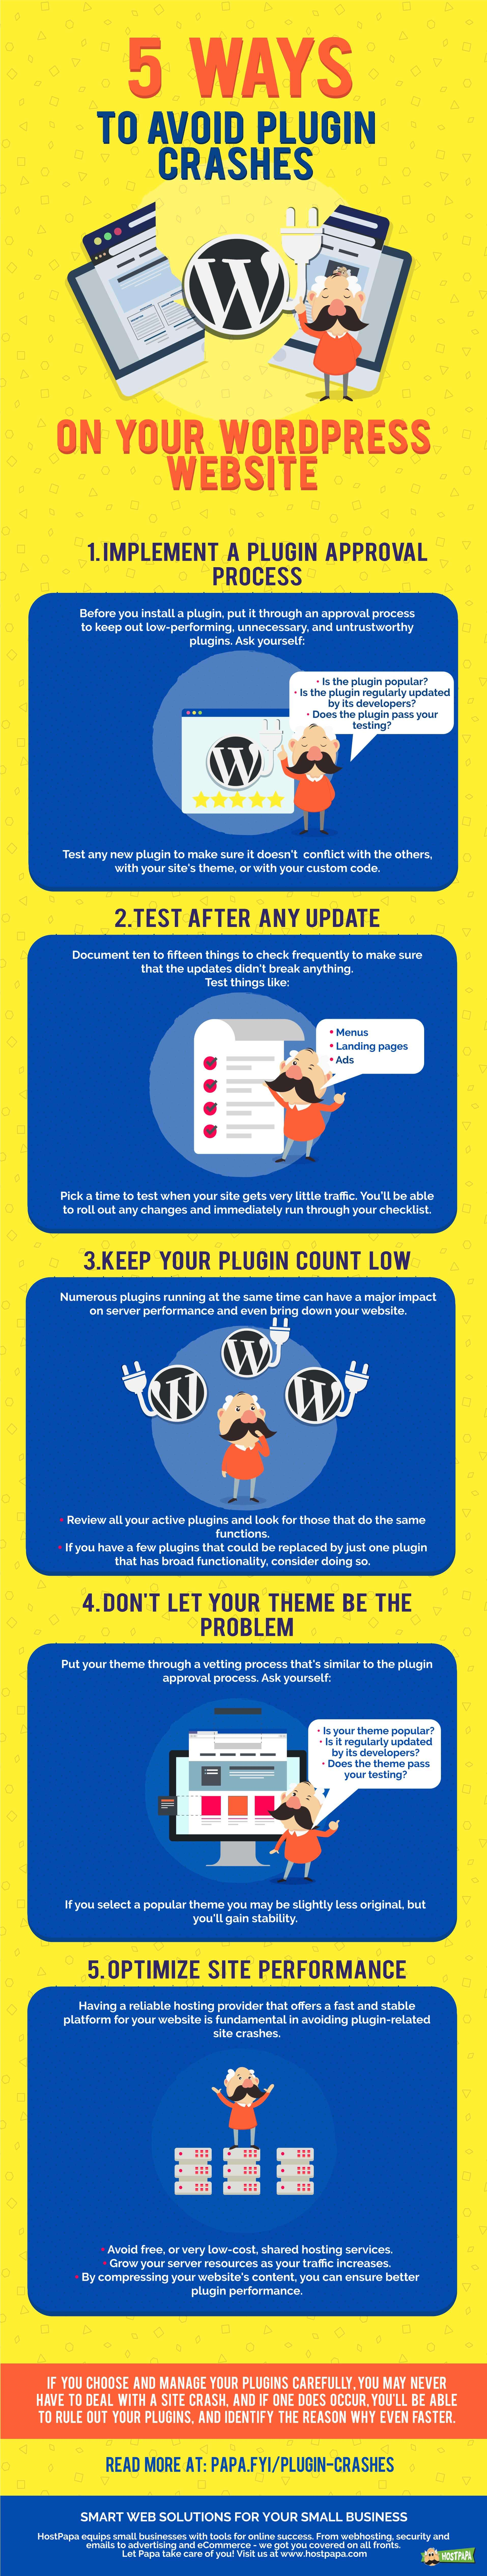 infographic about wordpress plugins